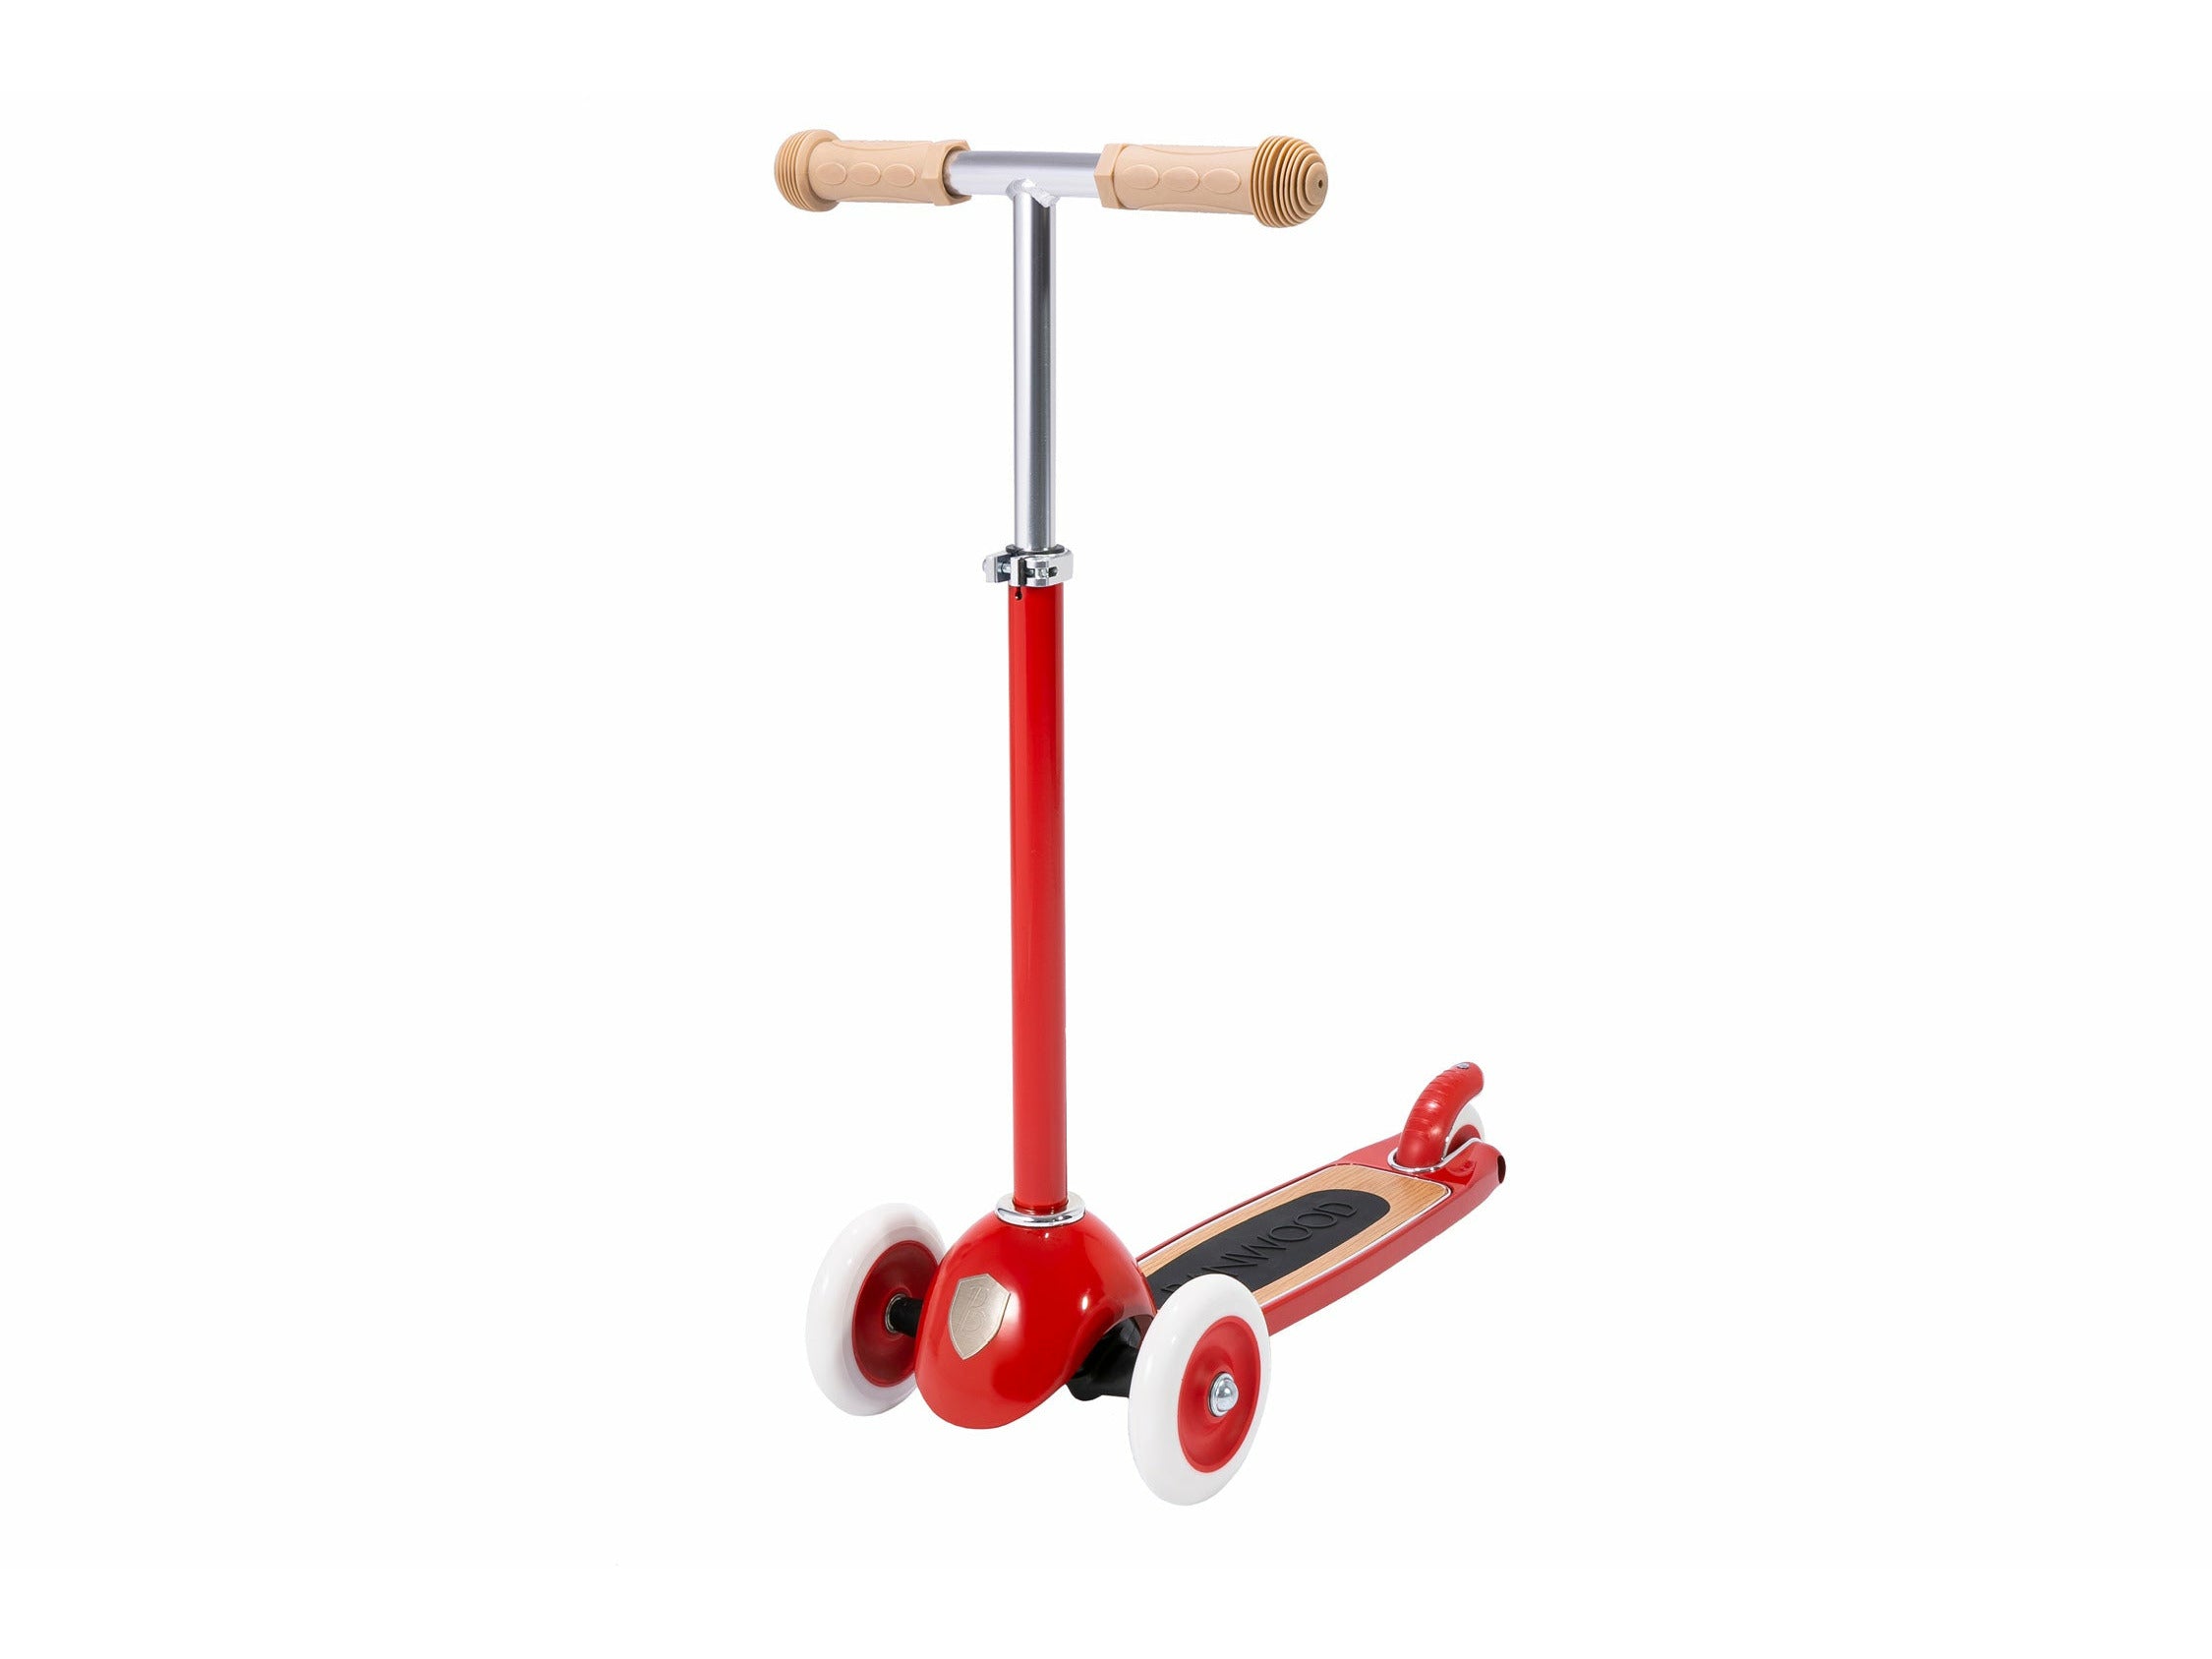 Banwood Three-Wheel Kick Scooter - Vintage Inspired Kid's Scooter 